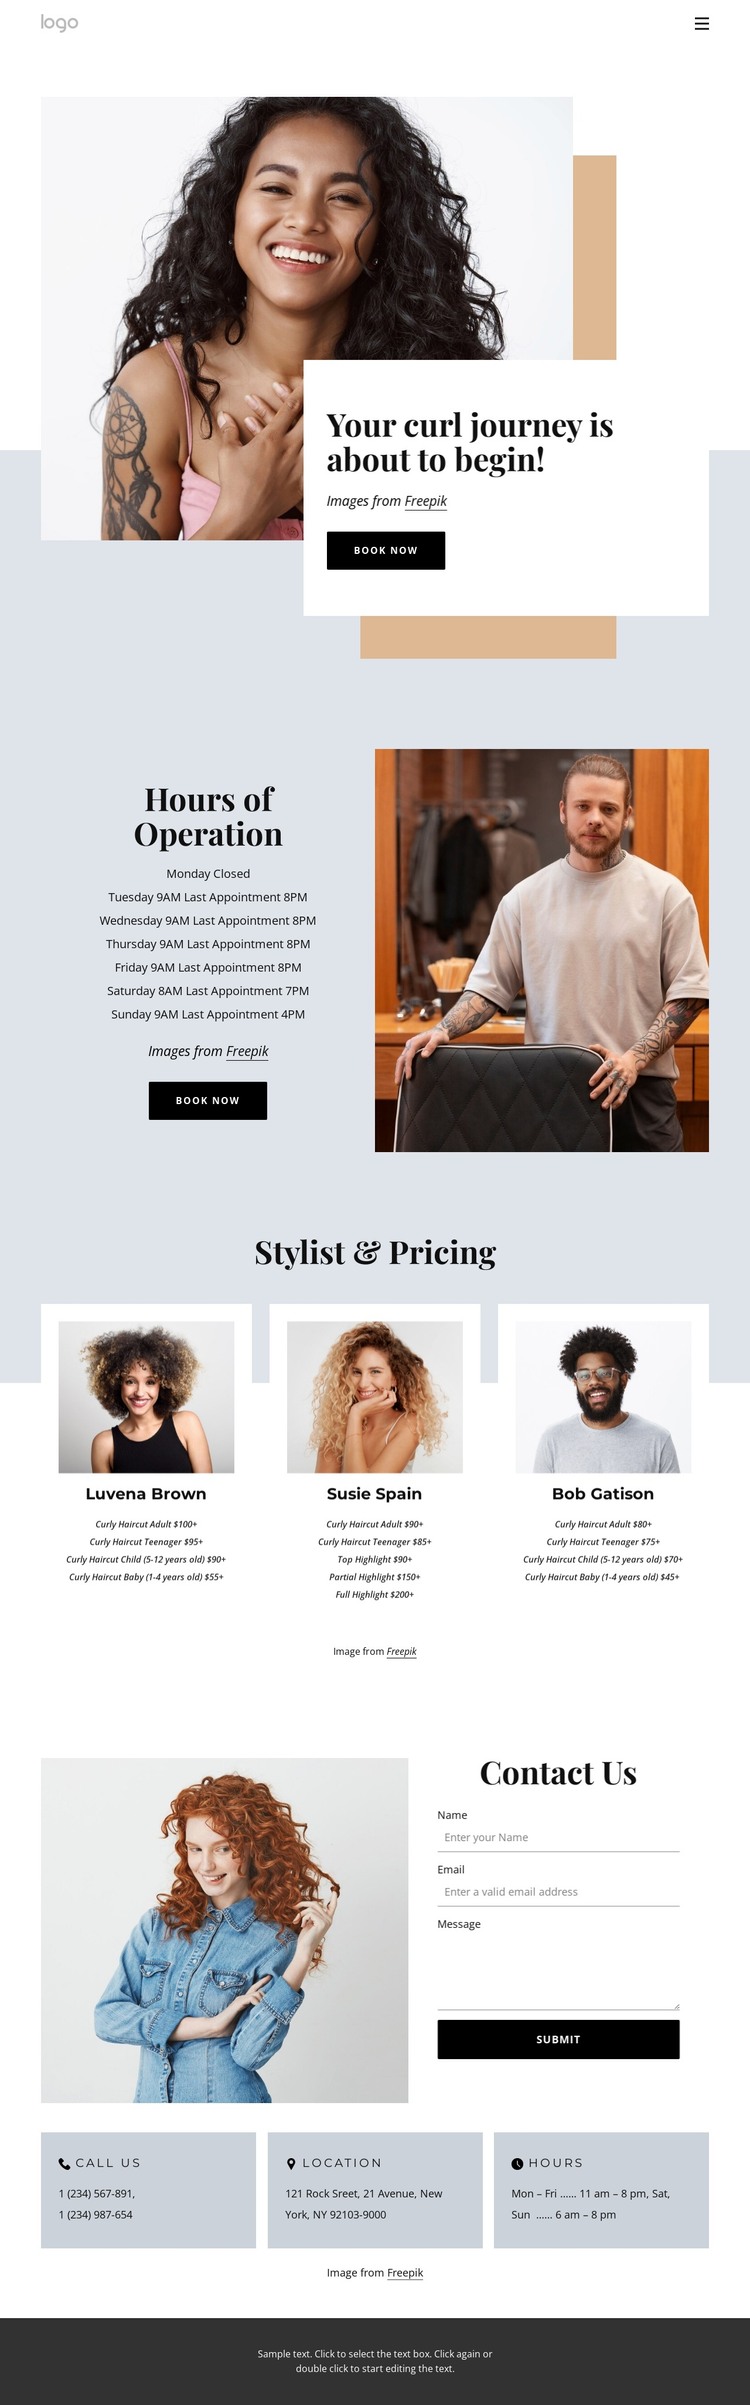 Your curl journey HTML Template